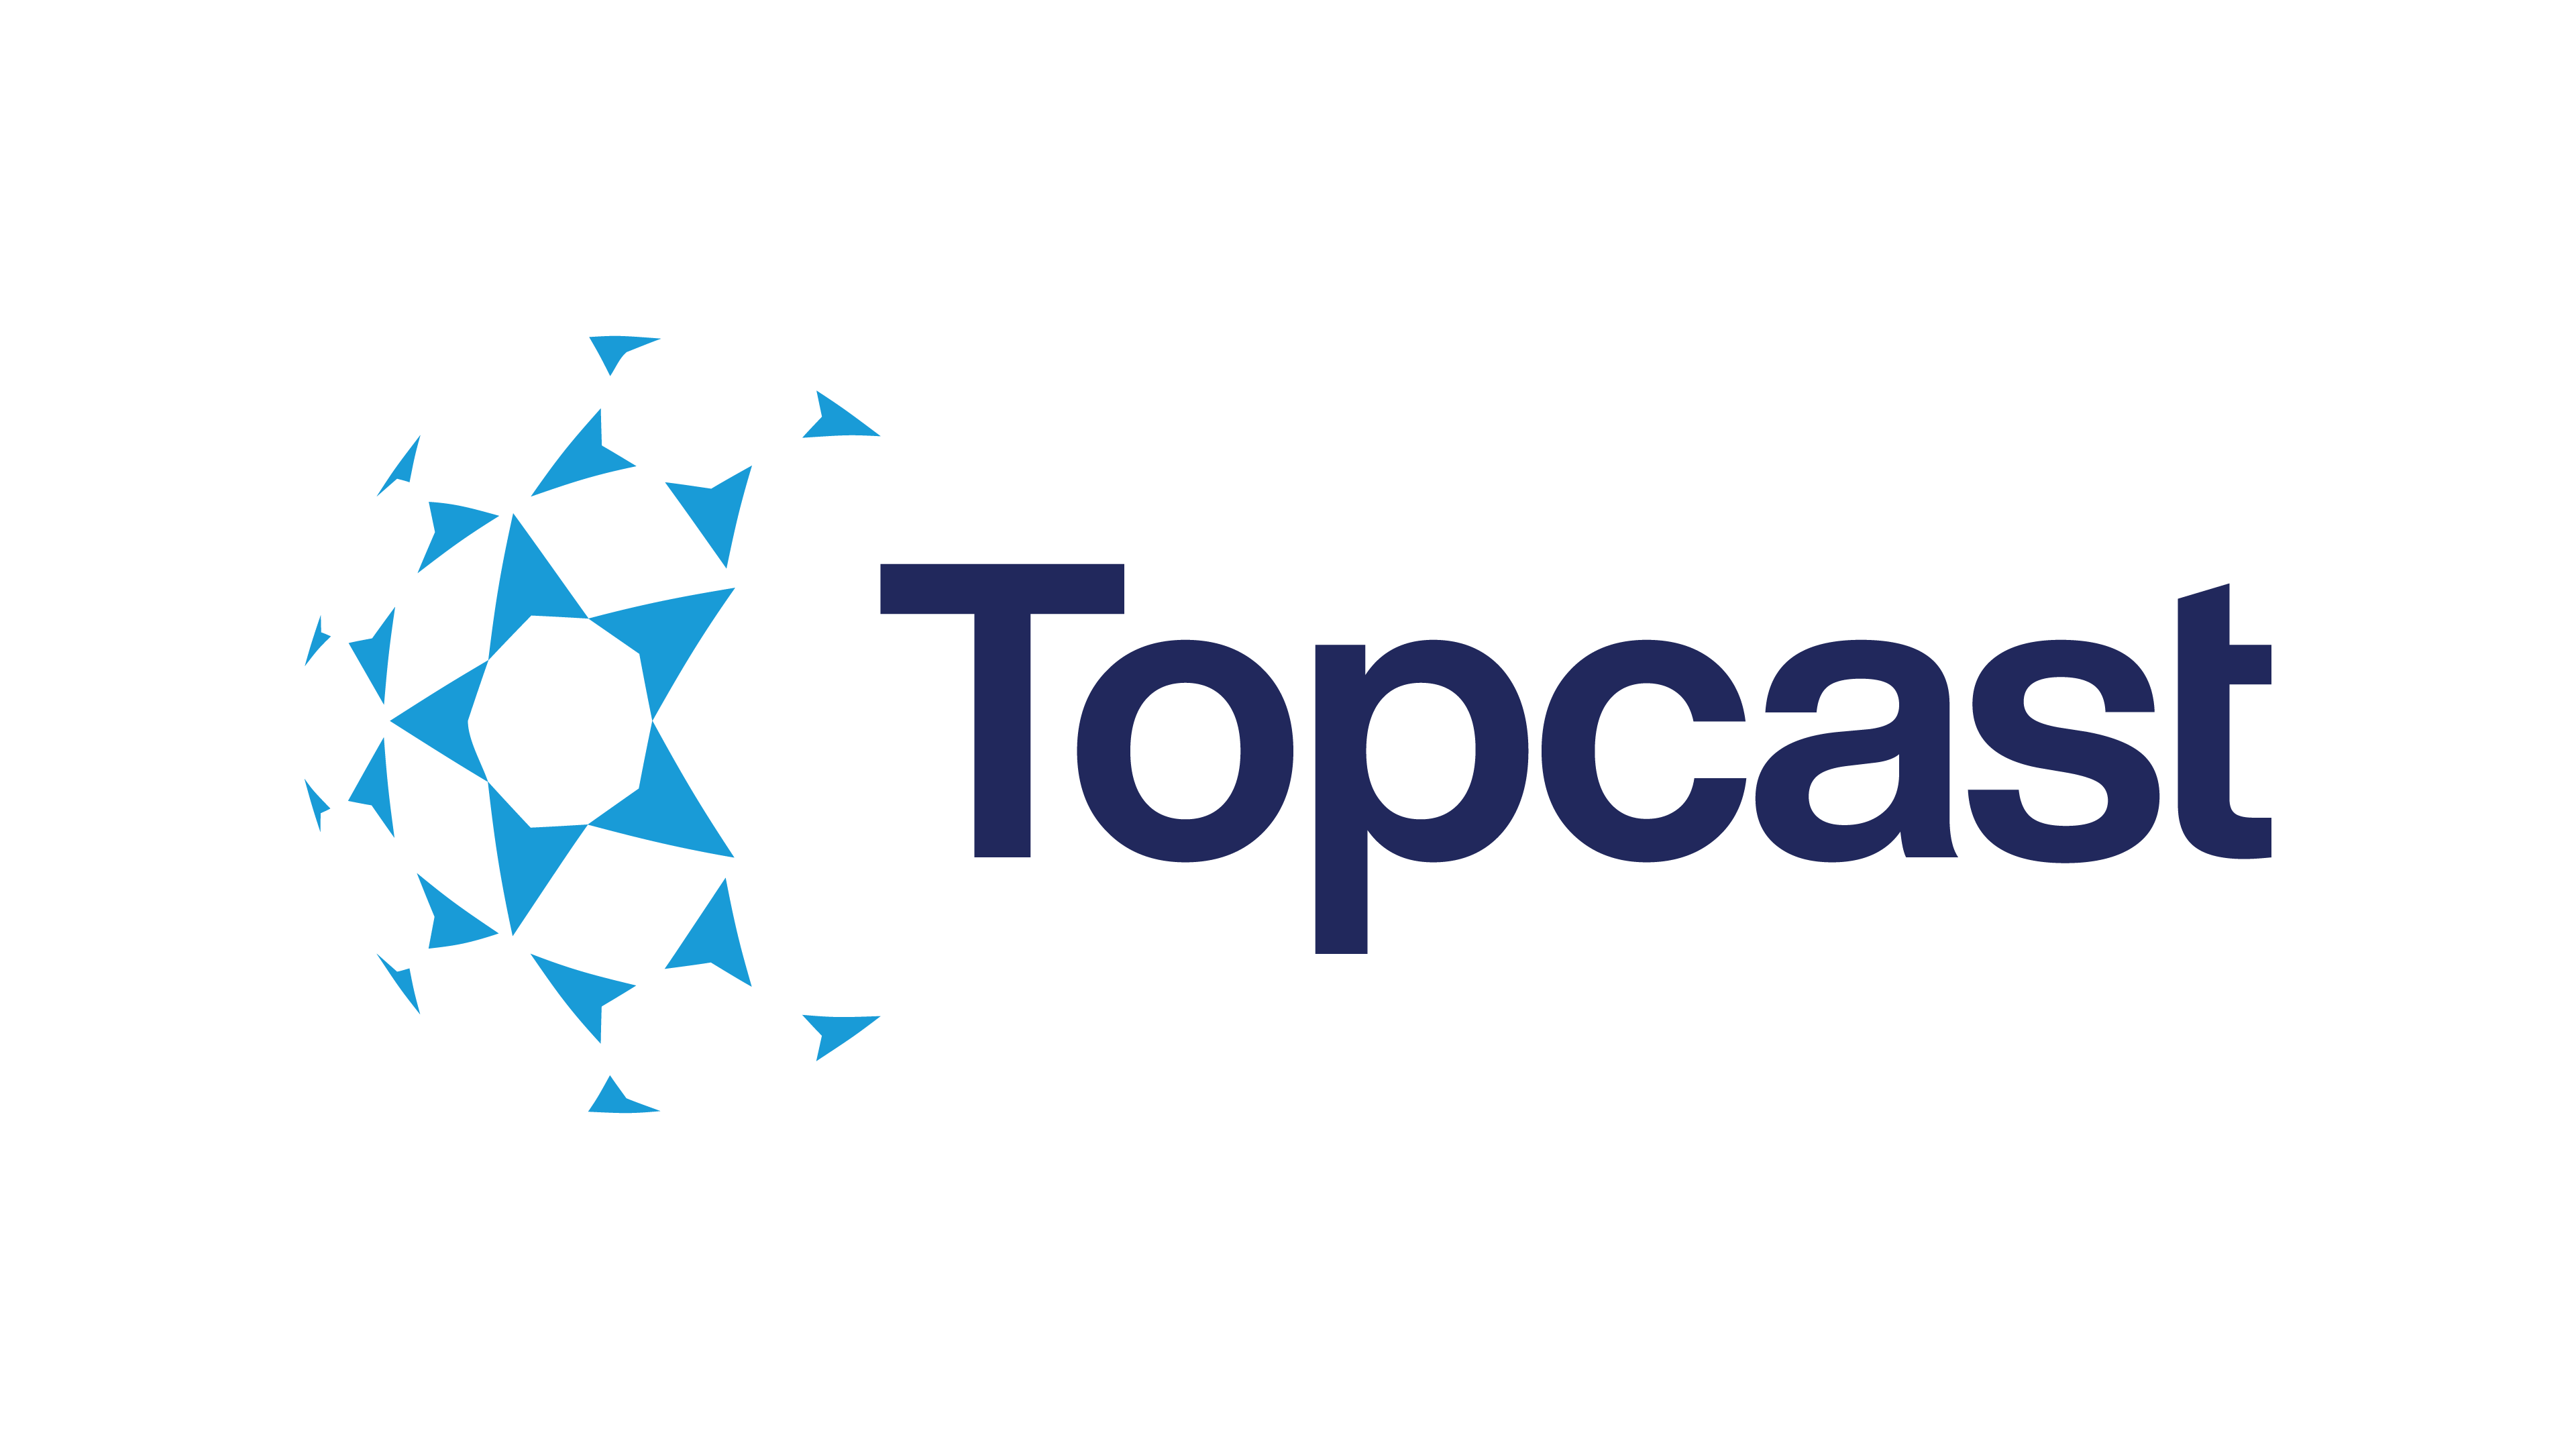 Topcast Debuts Transformation to Global Enterprise with Refreshed Corporate Identity and Vision “Connecting a Better World”